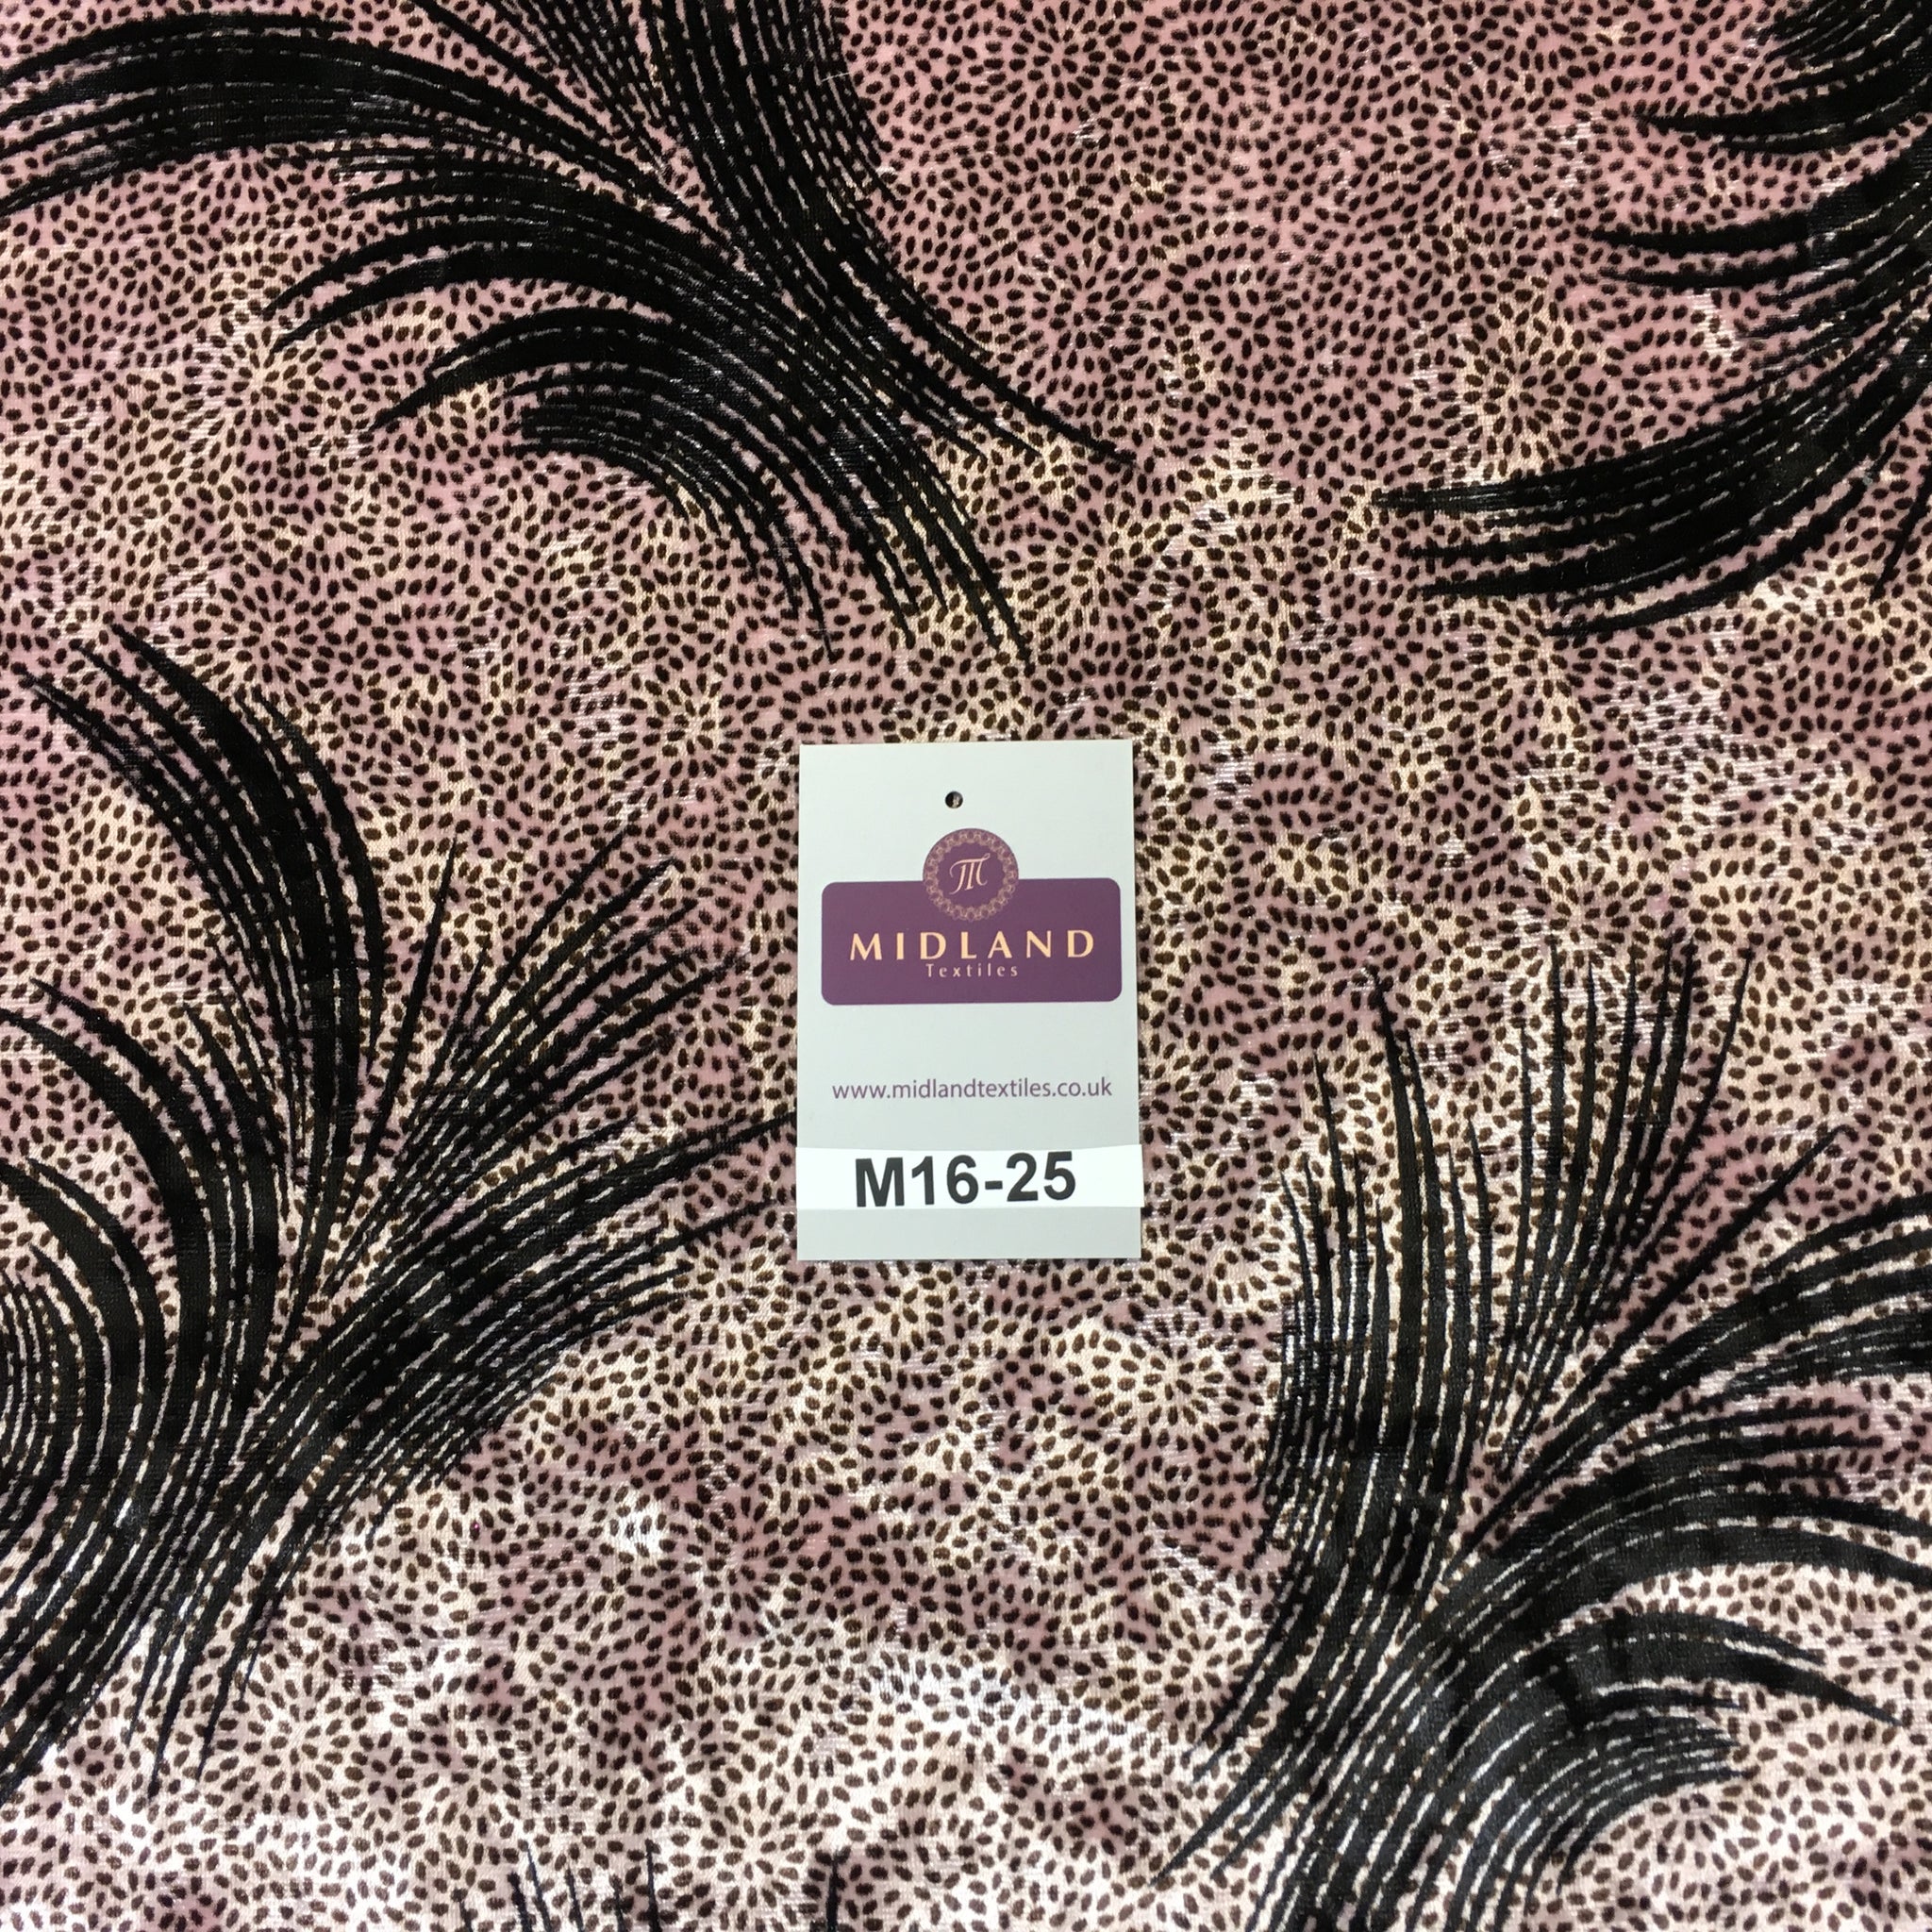 Rose Pink feathery Plant Velvet one way stretch dress fabric 58" wide M16-25 - Midland Textiles & Fabric